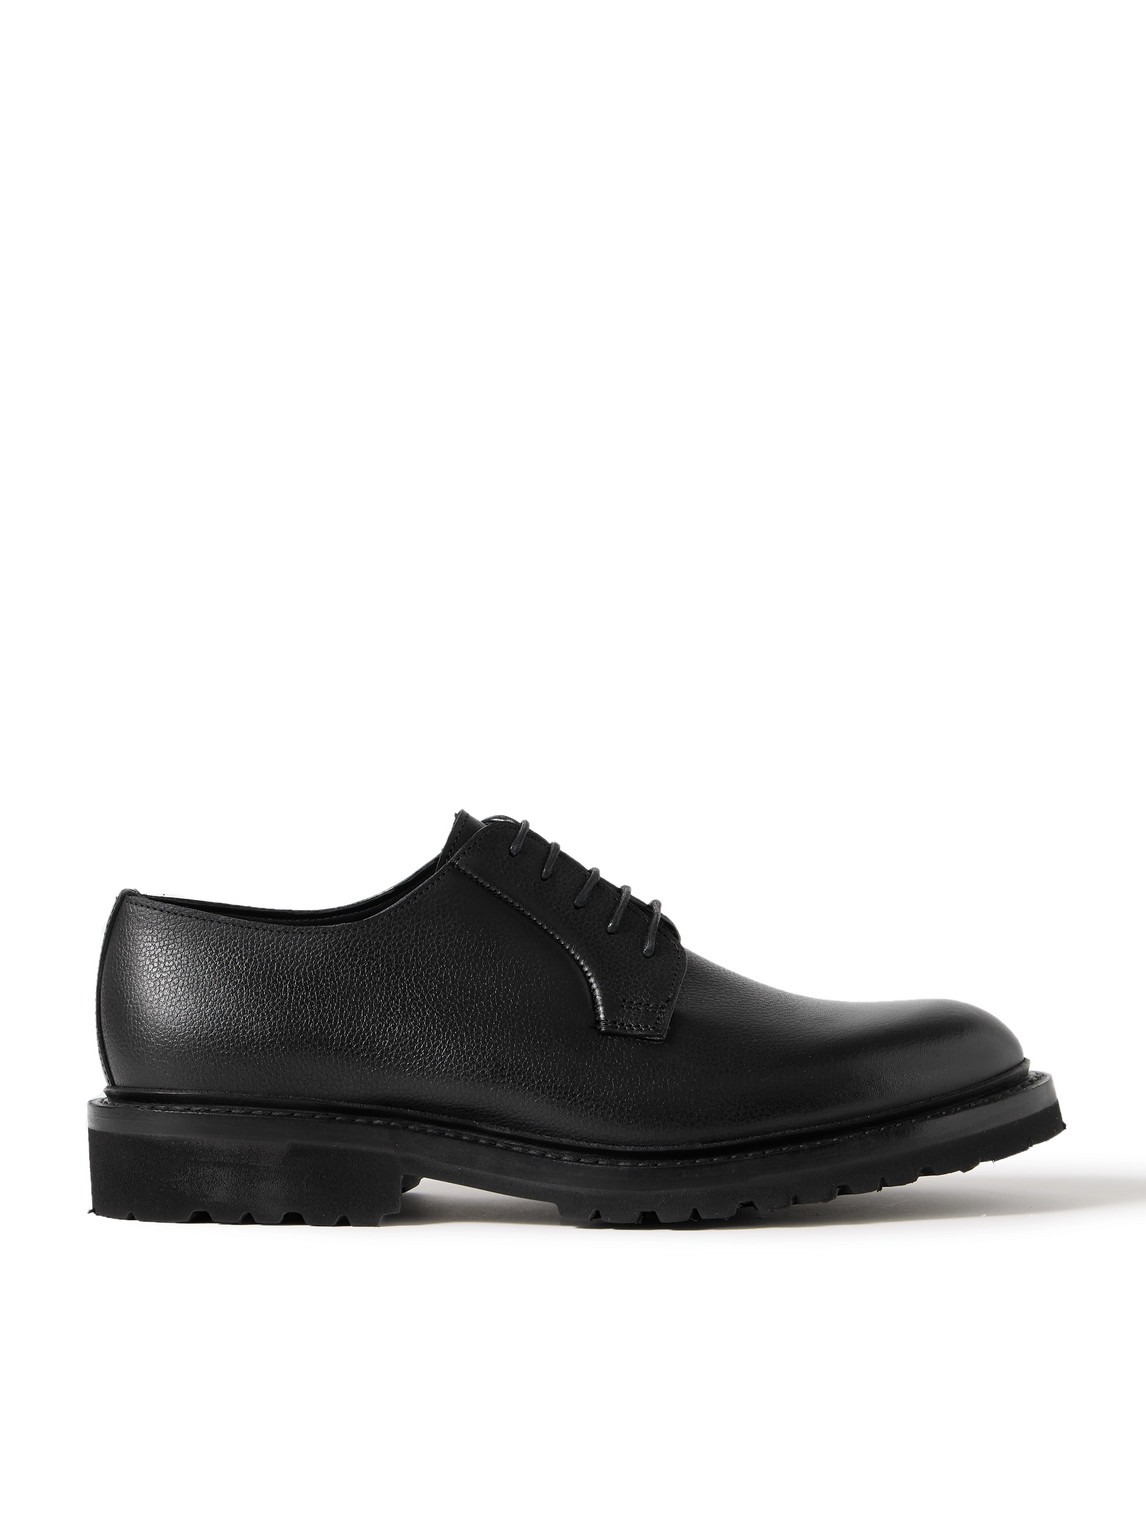 Archie Full-Grain Leather Derby Shoes